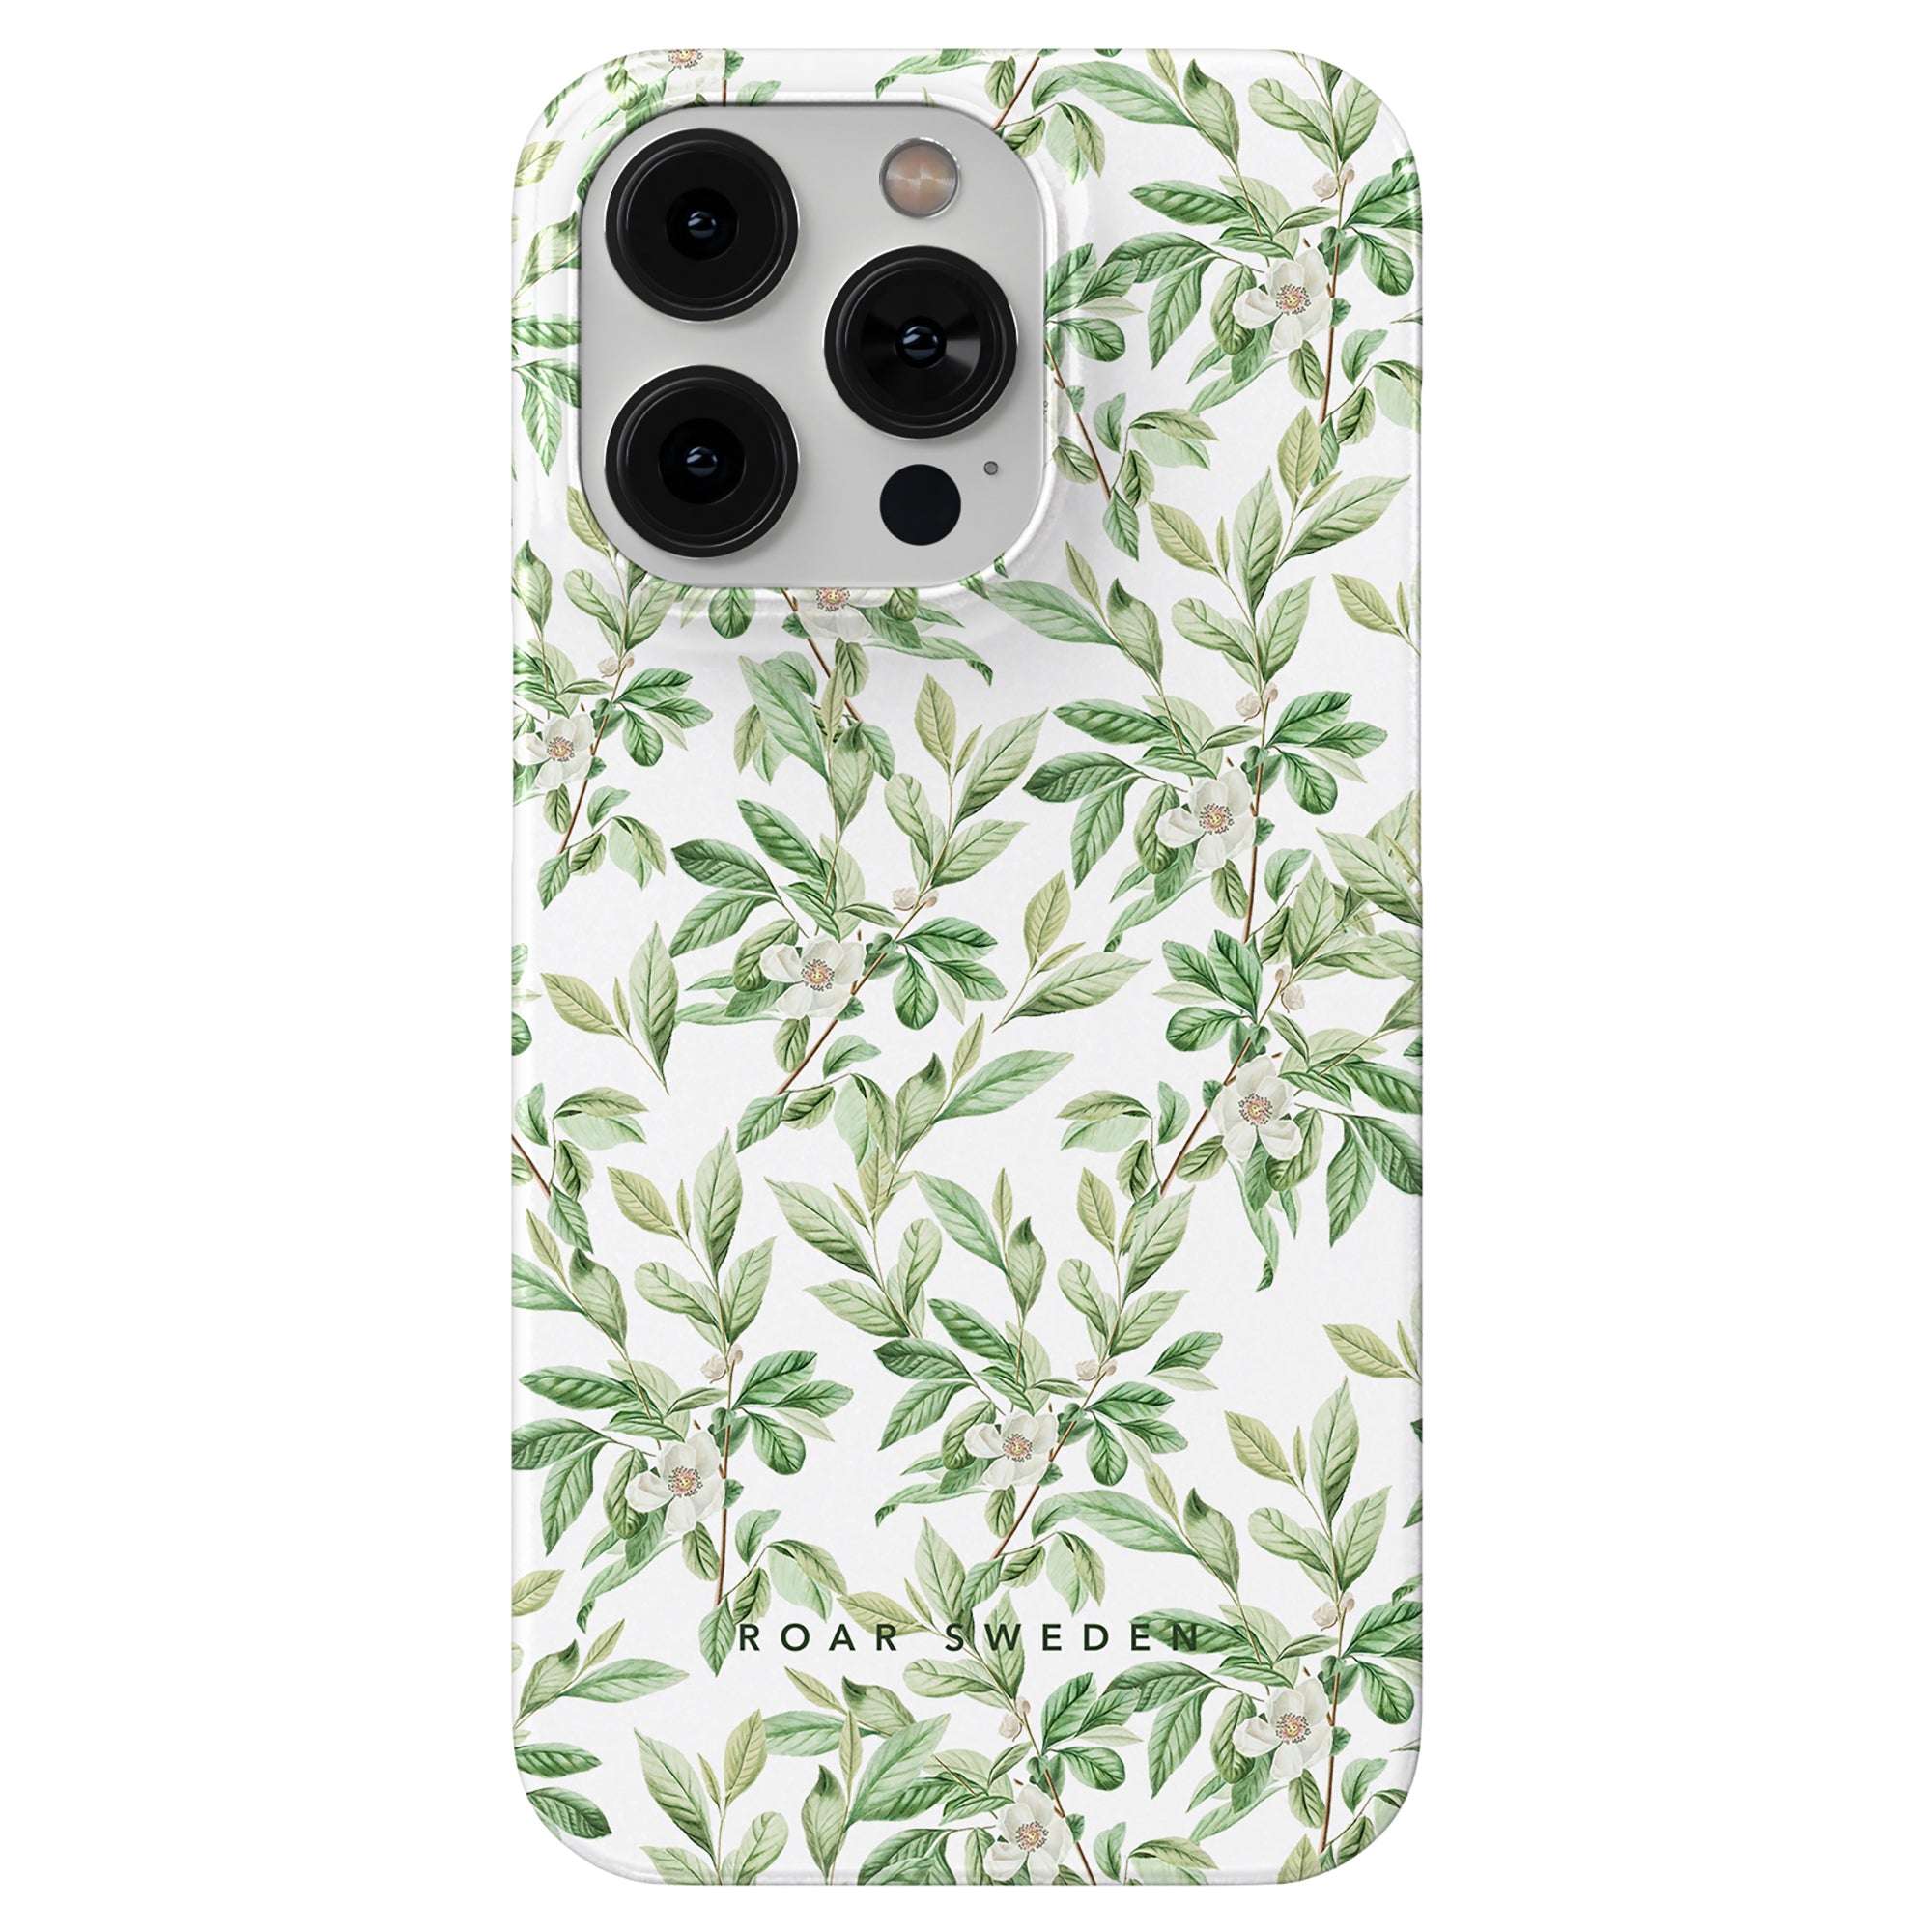 A smartphone with a Spring Leaves - Slim case design, showcasing green leaves and white flowers, ideal for SEO product description.